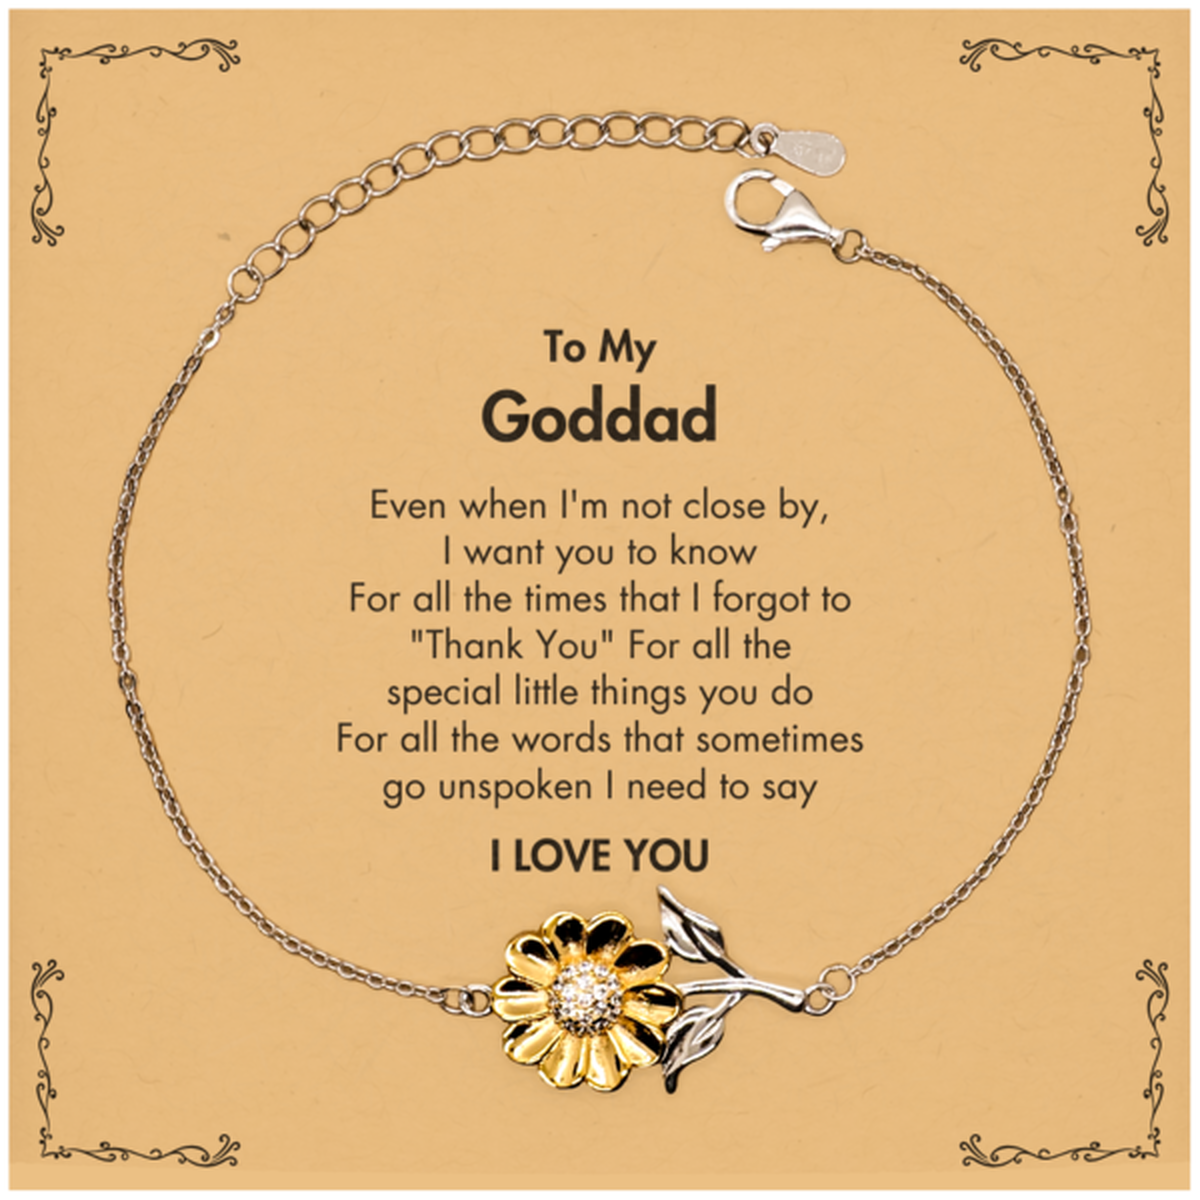 Thank You Gifts for Goddad, Keepsake Sunflower Bracelet Gifts for Goddad Birthday Mother's day Father's Day Goddad For all the words That sometimes go unspoken I need to say I LOVE YOU